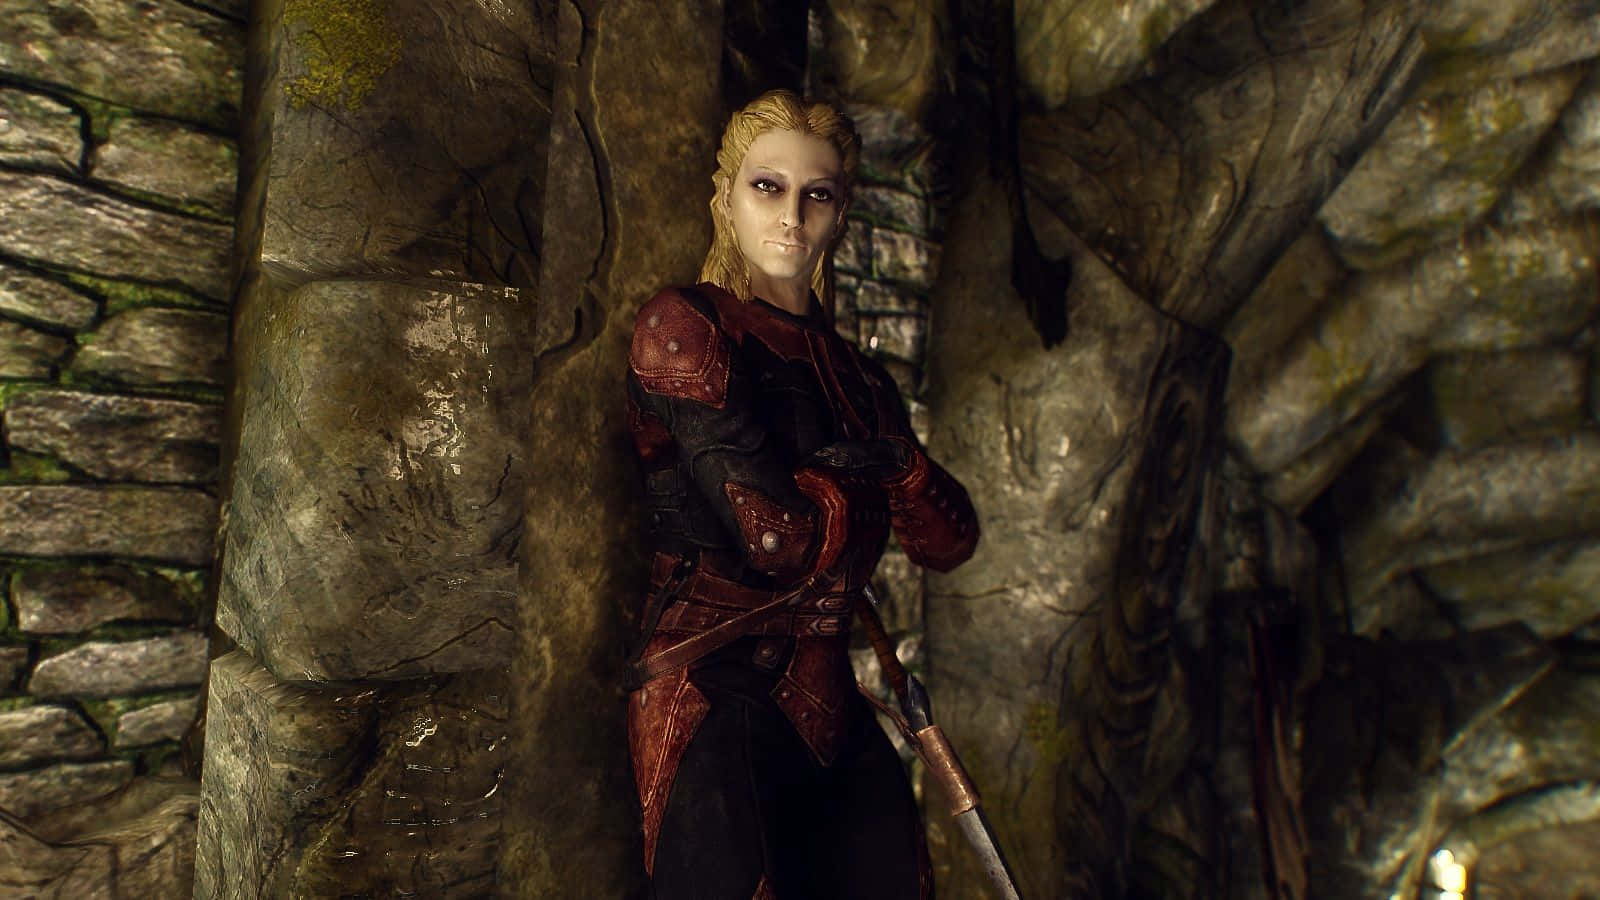 The Fierce And Powerful Leader Astrid From The World Of Skyrim Wallpaper